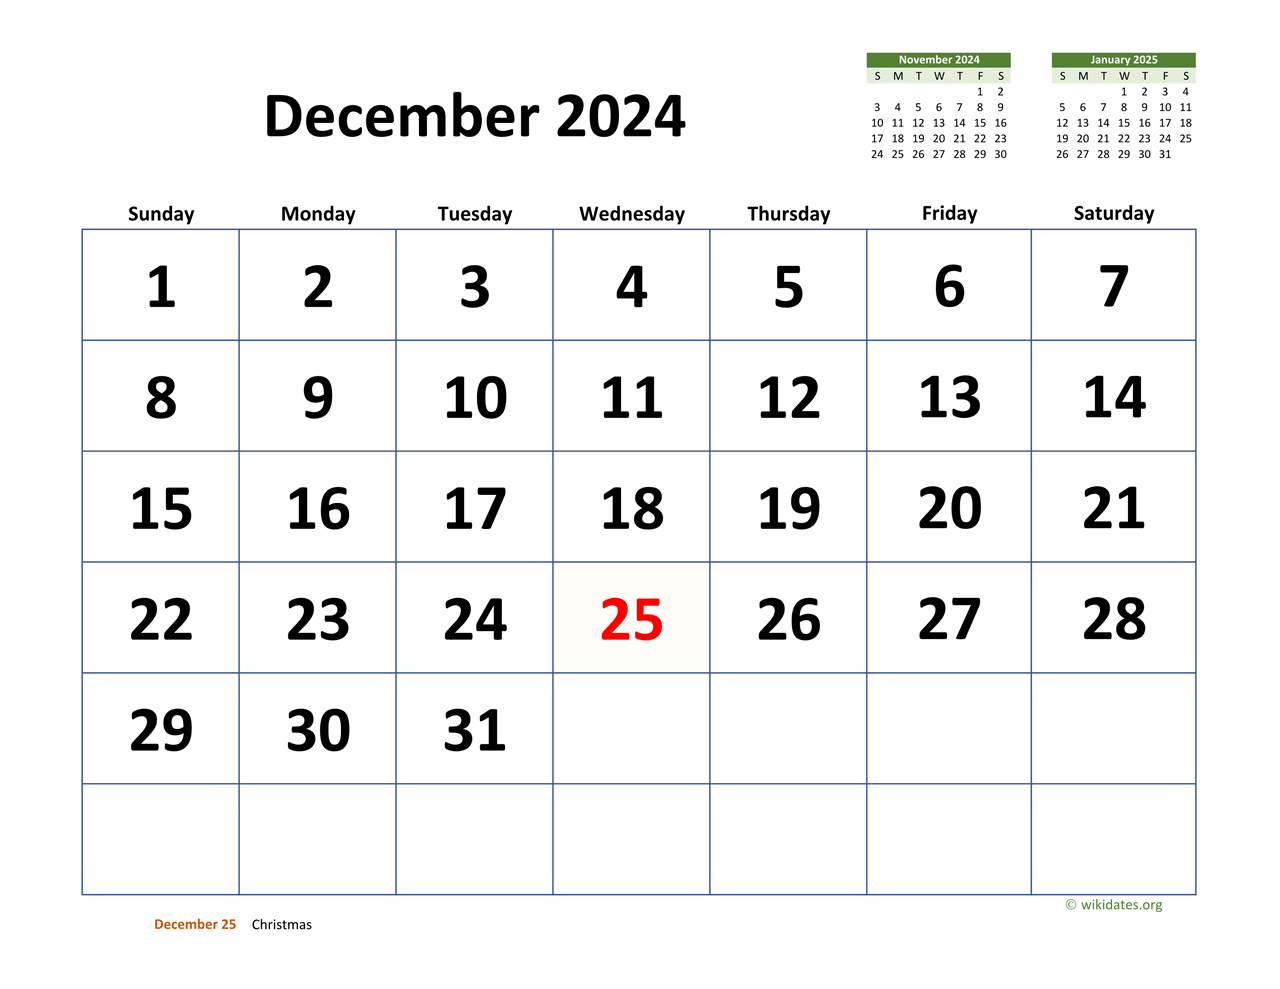 December 2024 Calendar with Extra-large Dates | WikiDates.org